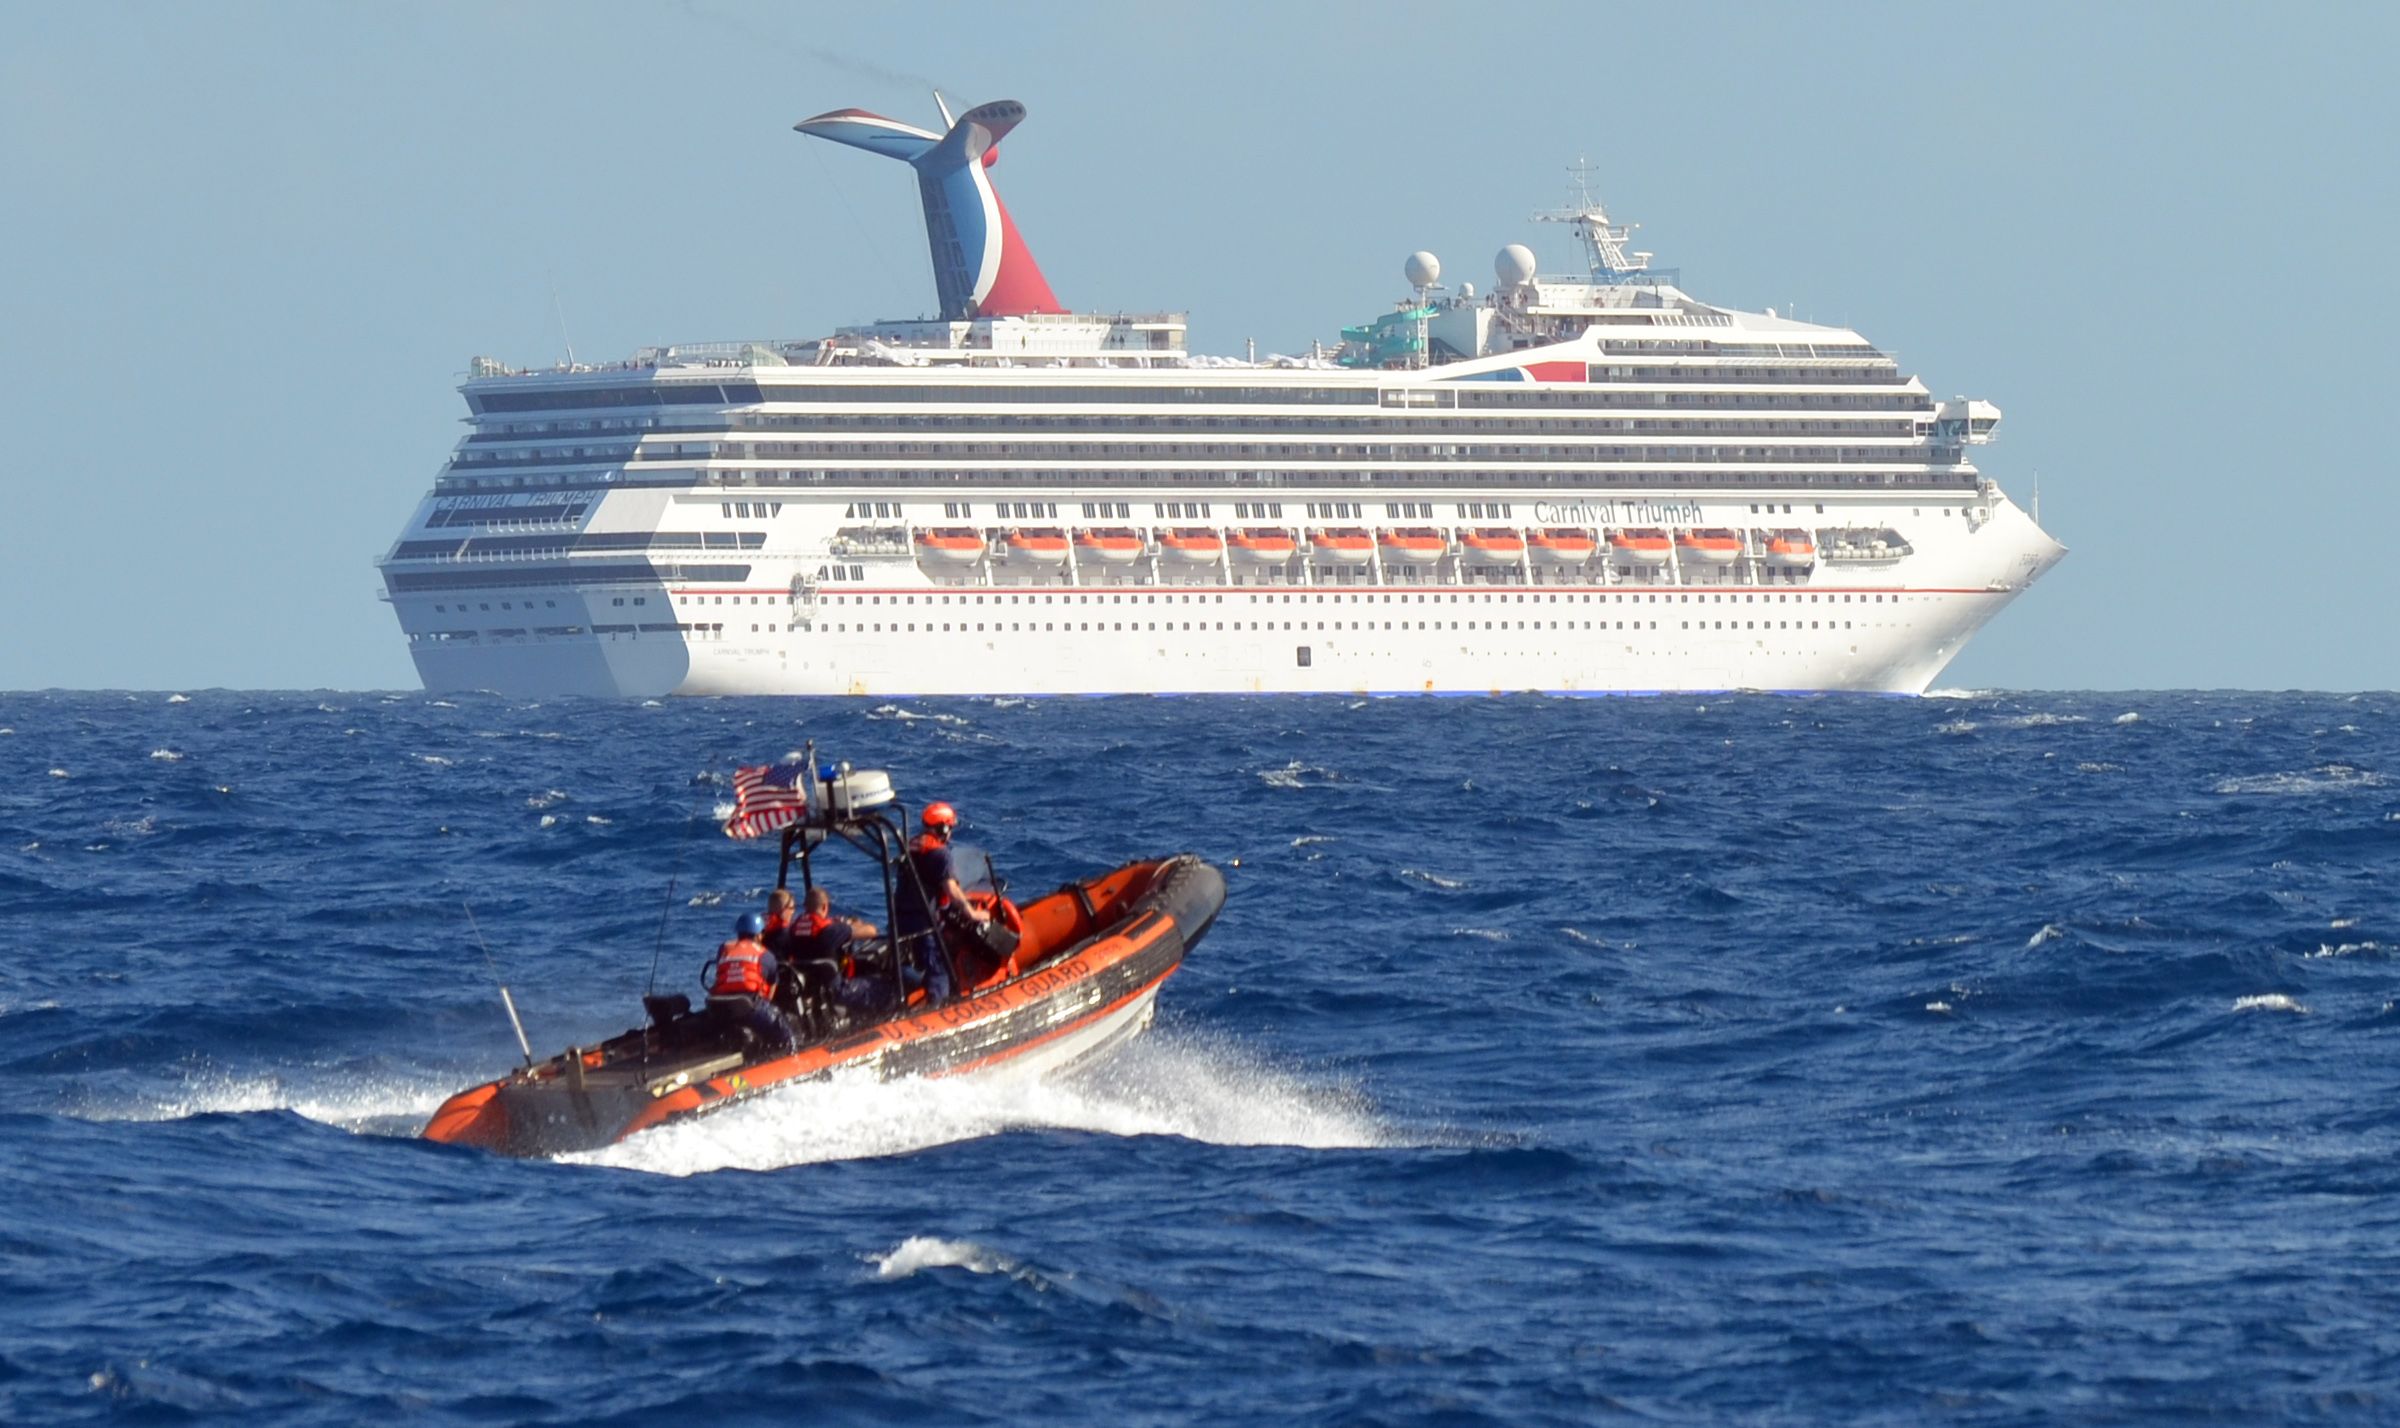 Poop cruise' Carnival Triumph set sail with problems